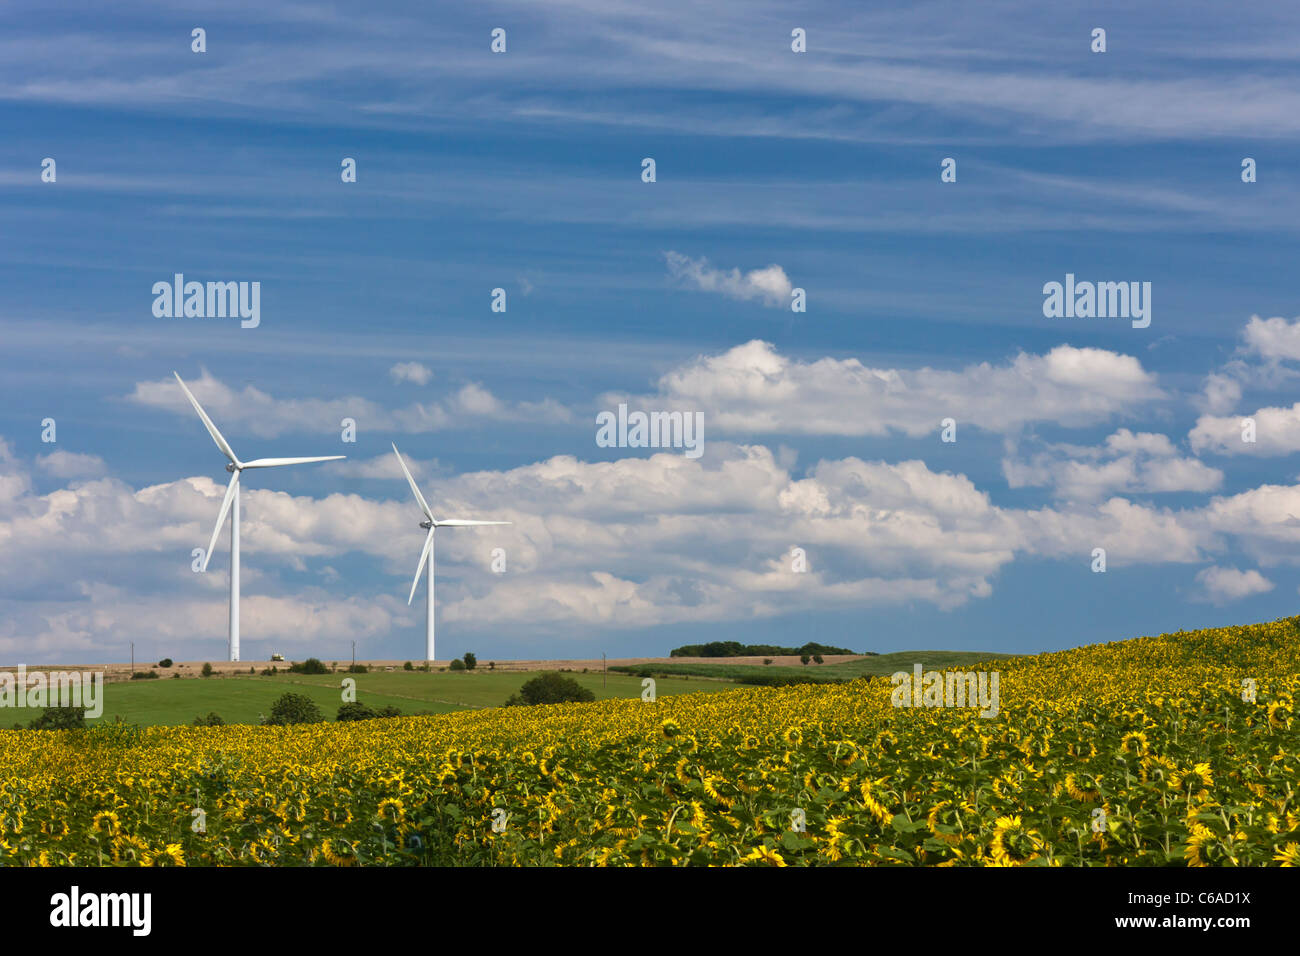 Wind energy generating turbines standing in the field with sunflowers. Stock Photo